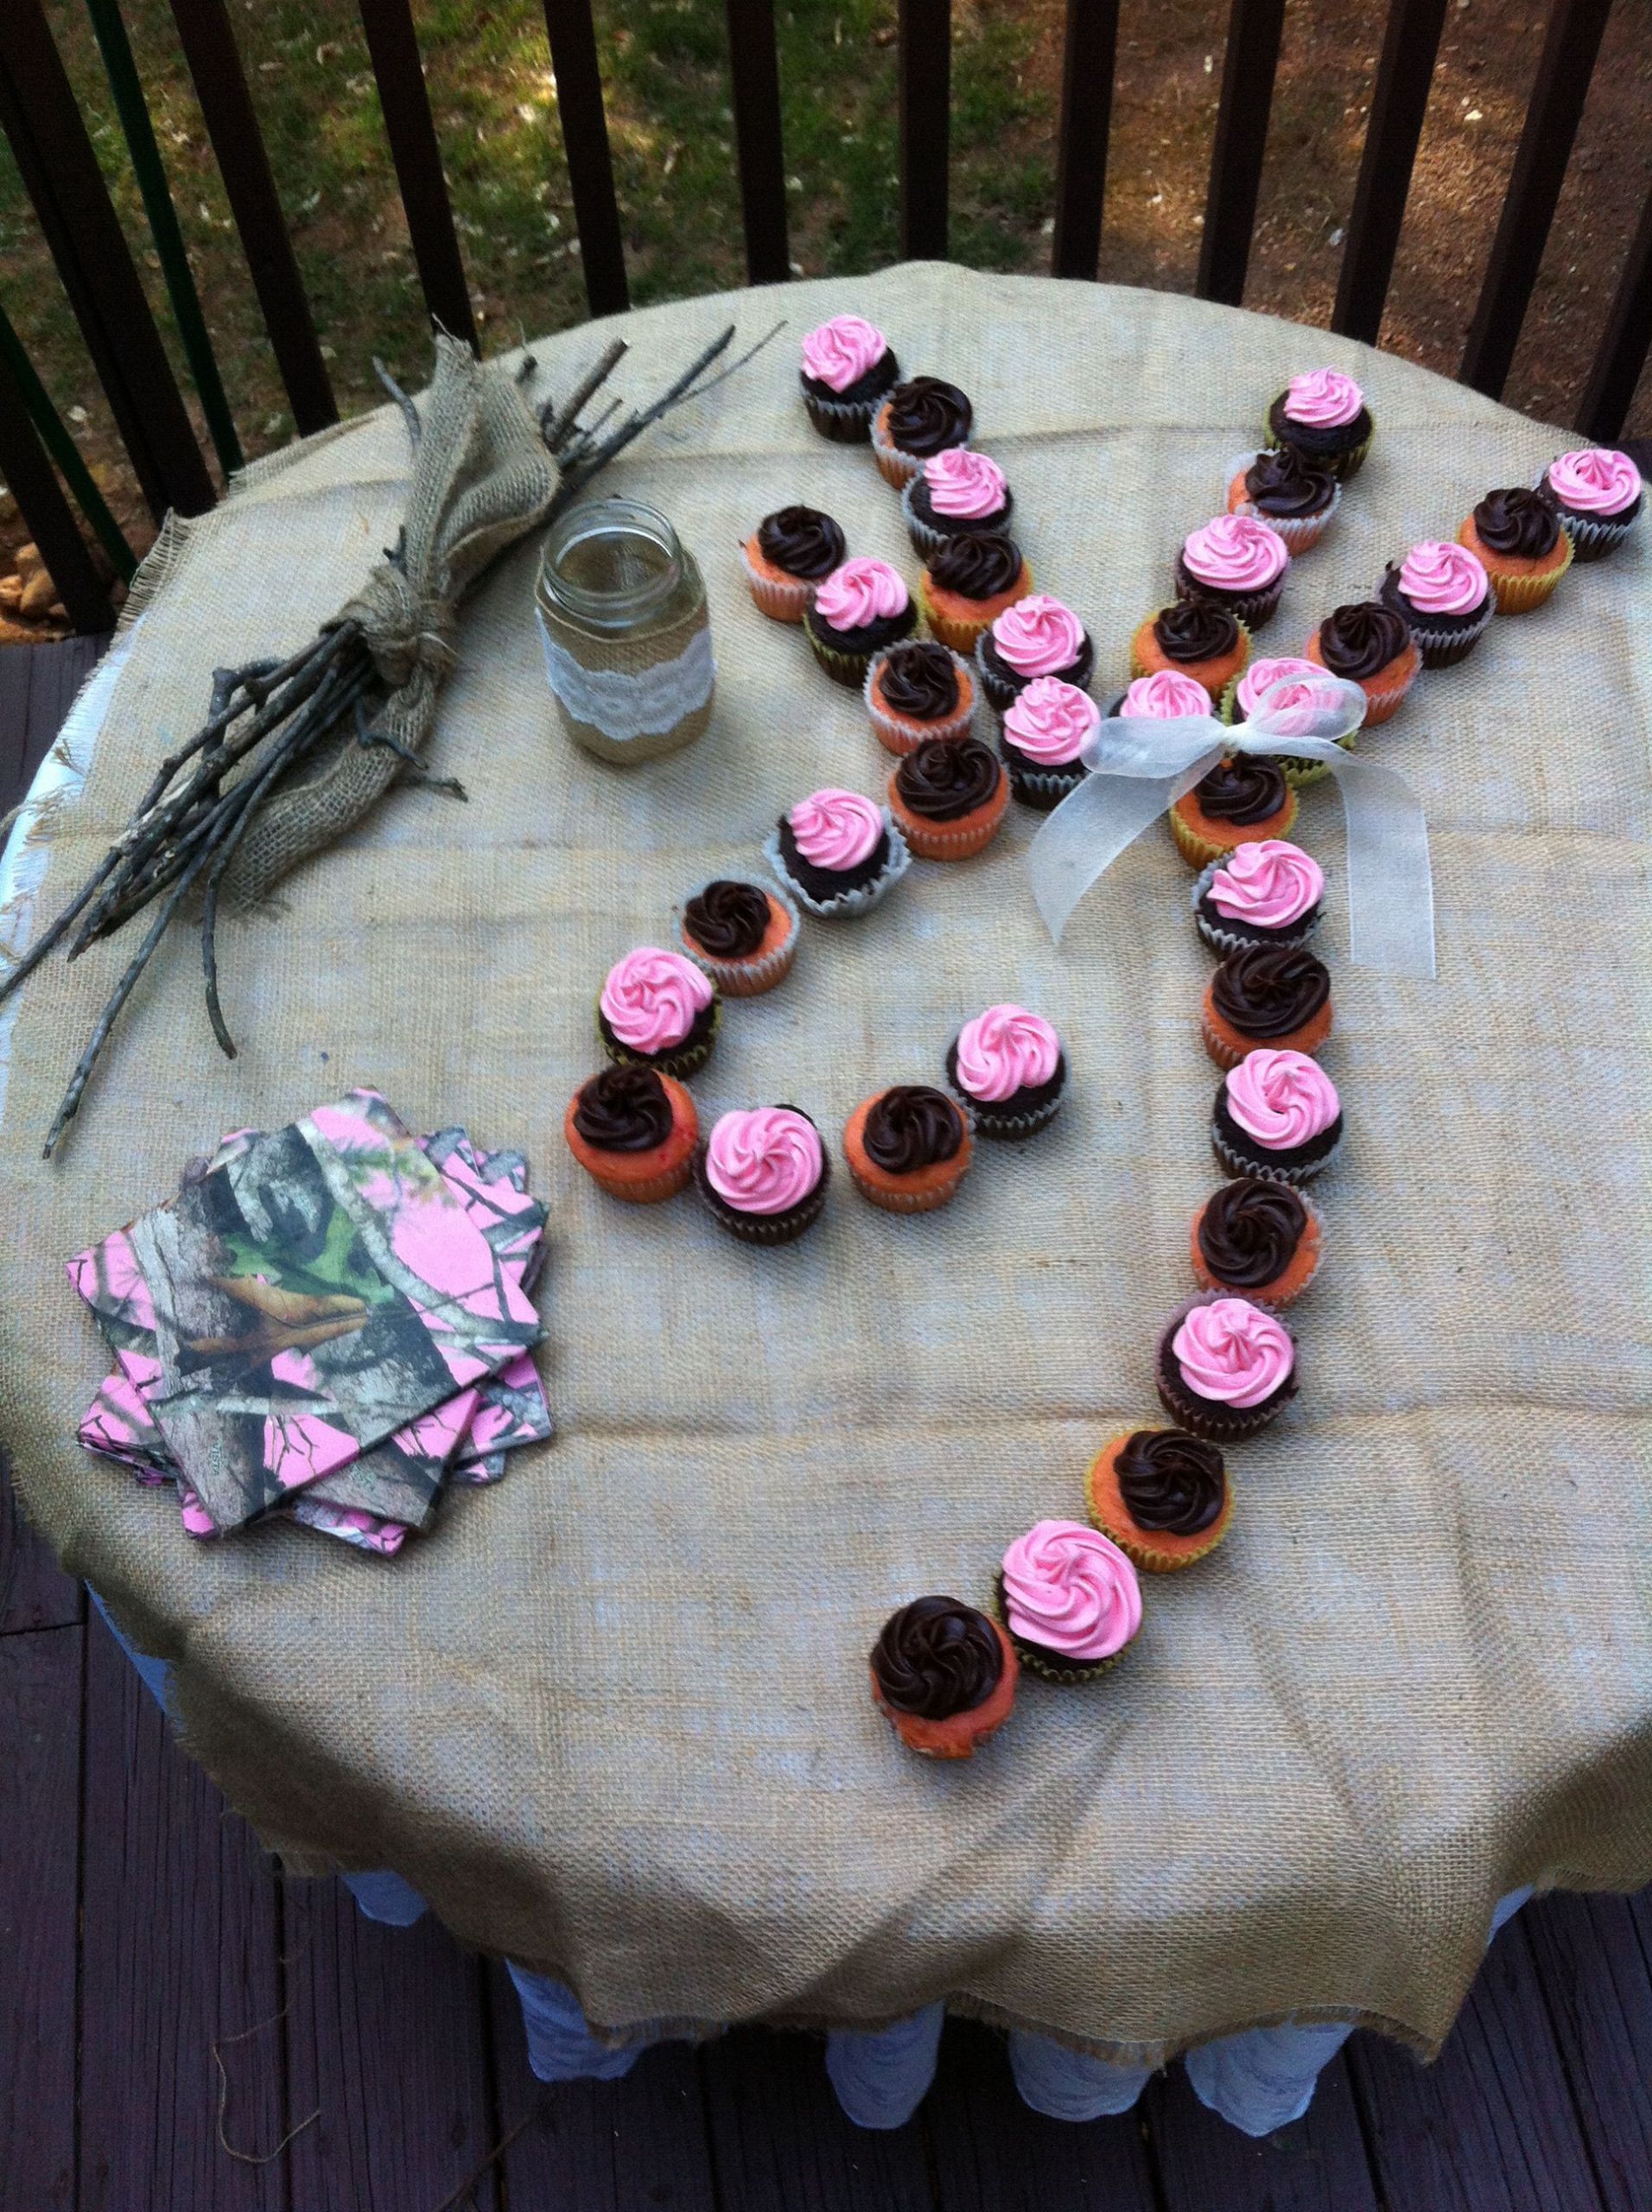 Pink Camouflage Birthday Party Ideas
 Browning Cupcakes for girls camo party in 2019